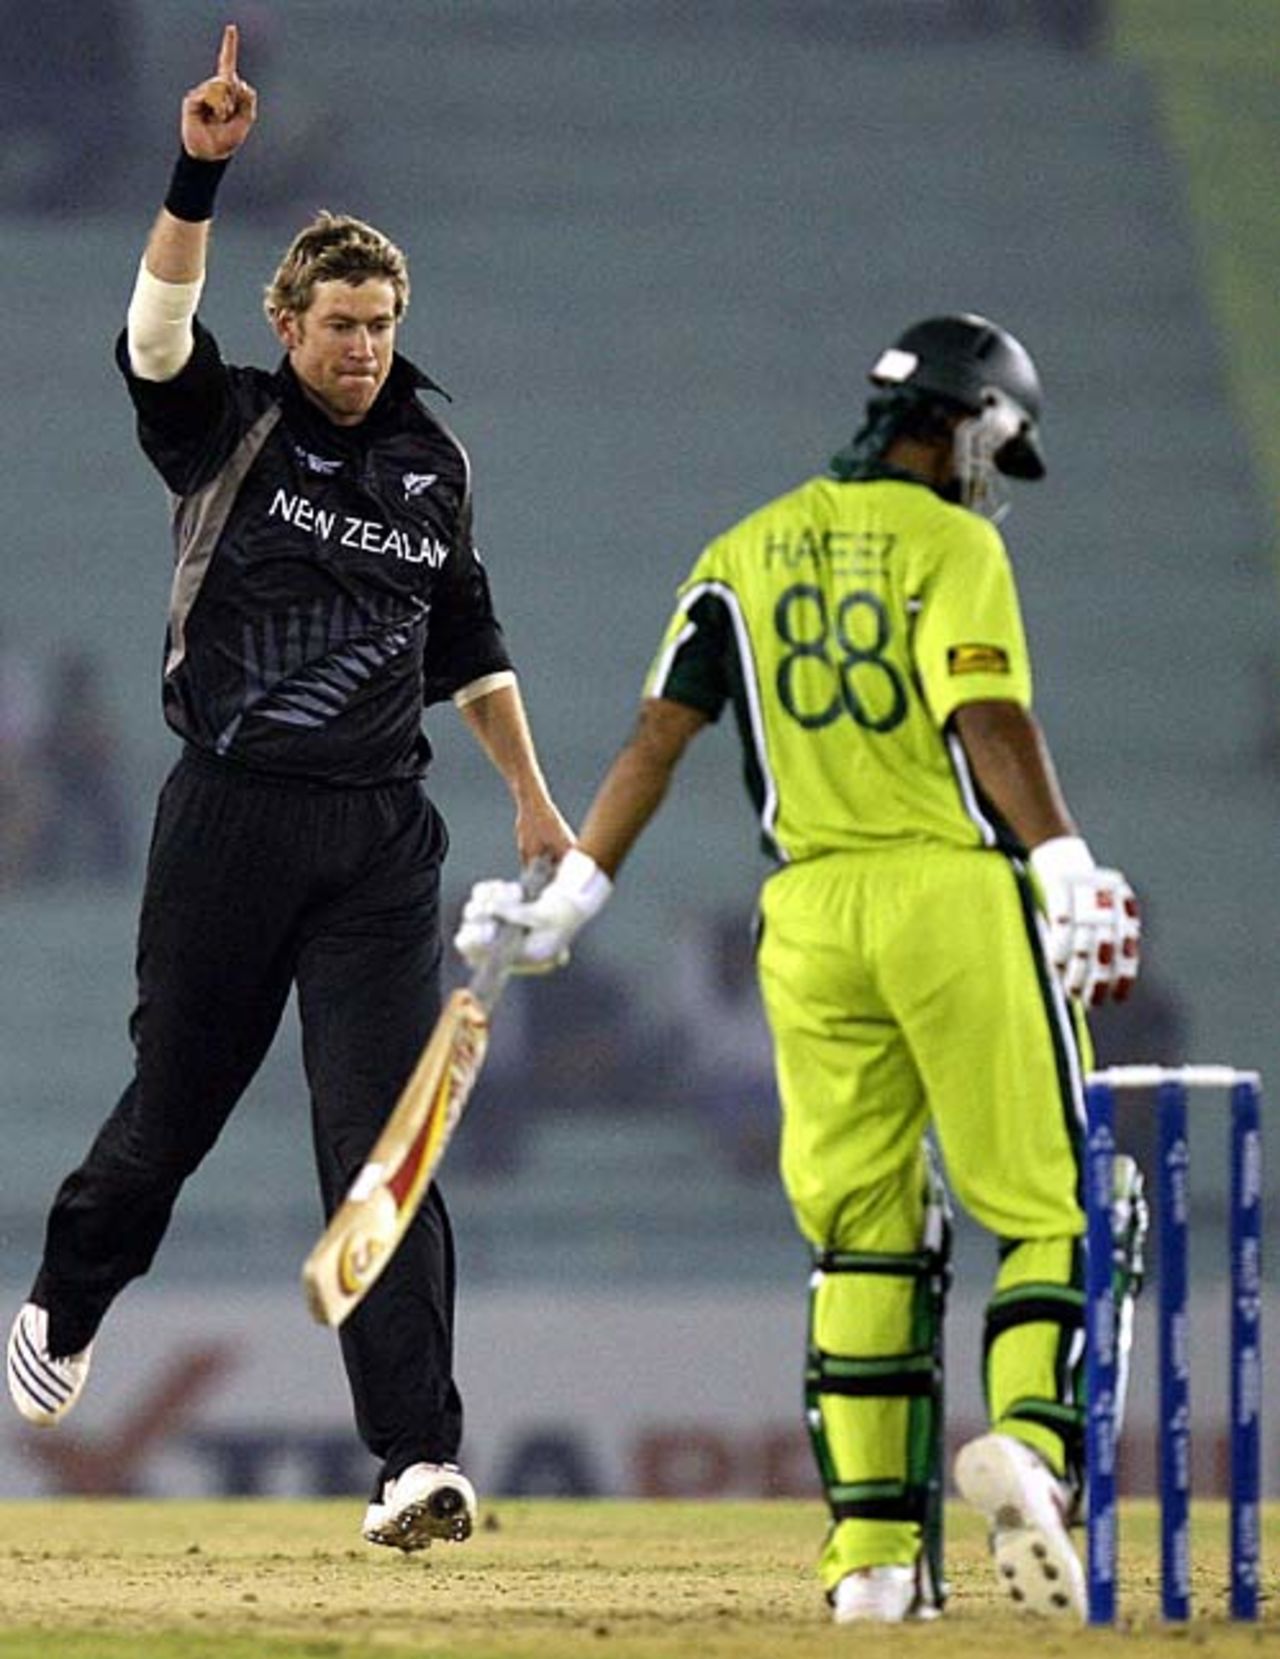 Jacob Oram celebrates the wicket of Mohammad Hafeez, New Zealand v Pakistan, 8th match, Mohali, Champions Trophy, October 25, 2006